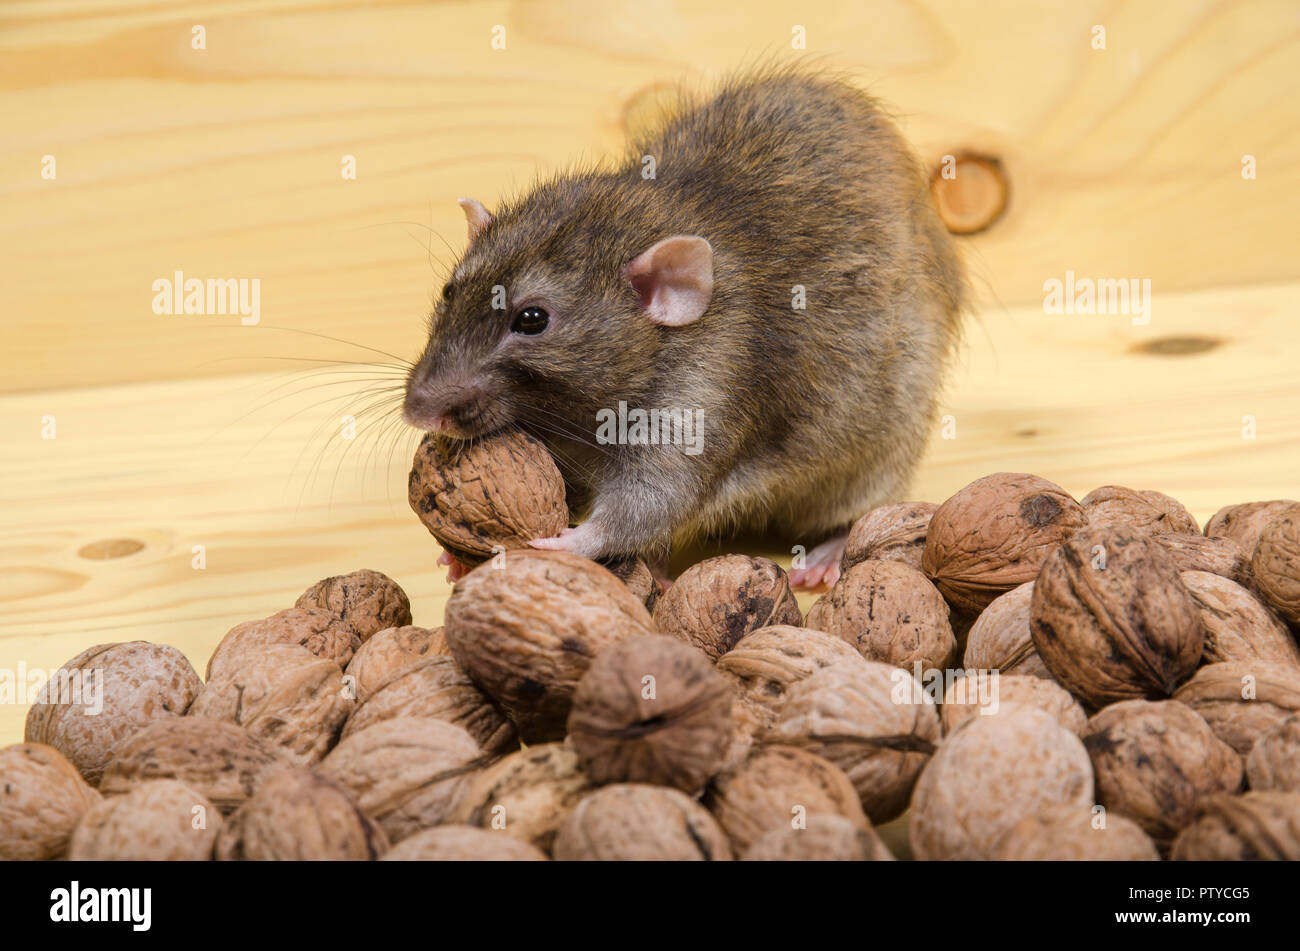 Rat and nuts on a wooden table. Stock Photo